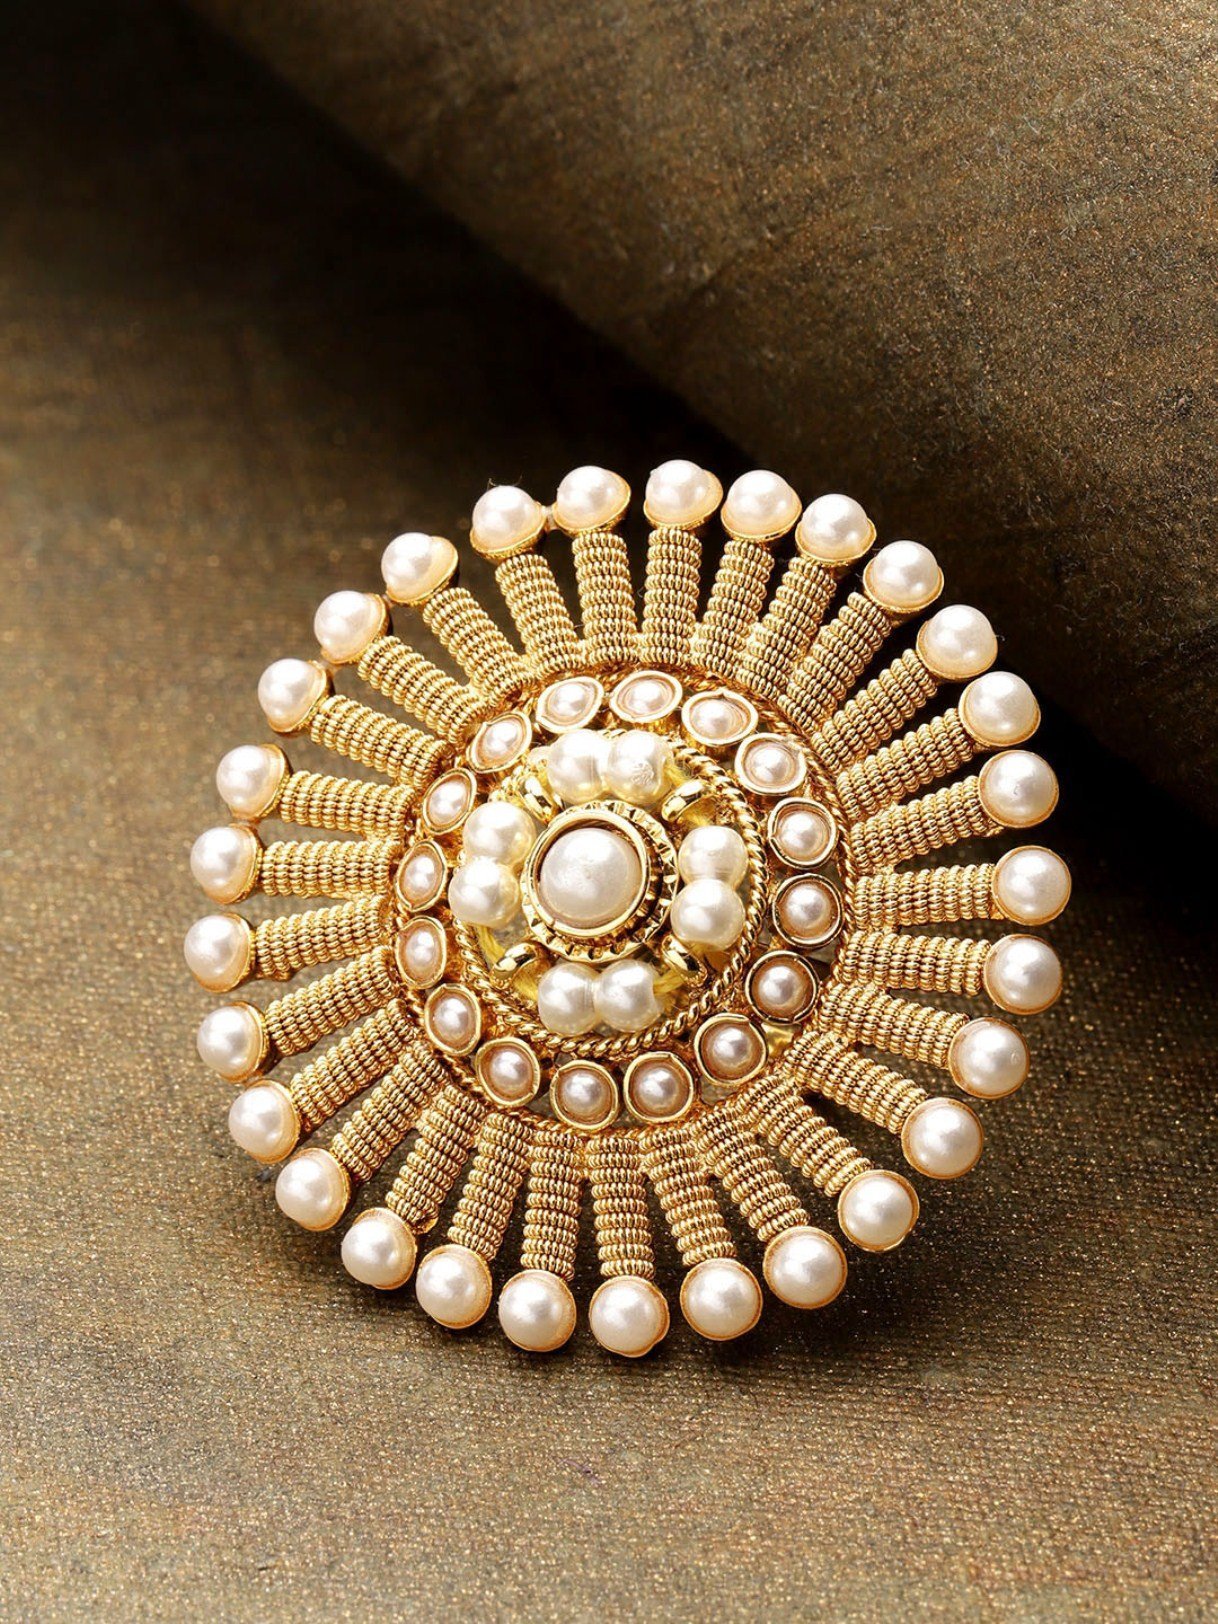 Women's Gold-Plated Pearls Studded Adjustable Ring in Floral Pattern - Priyaasi